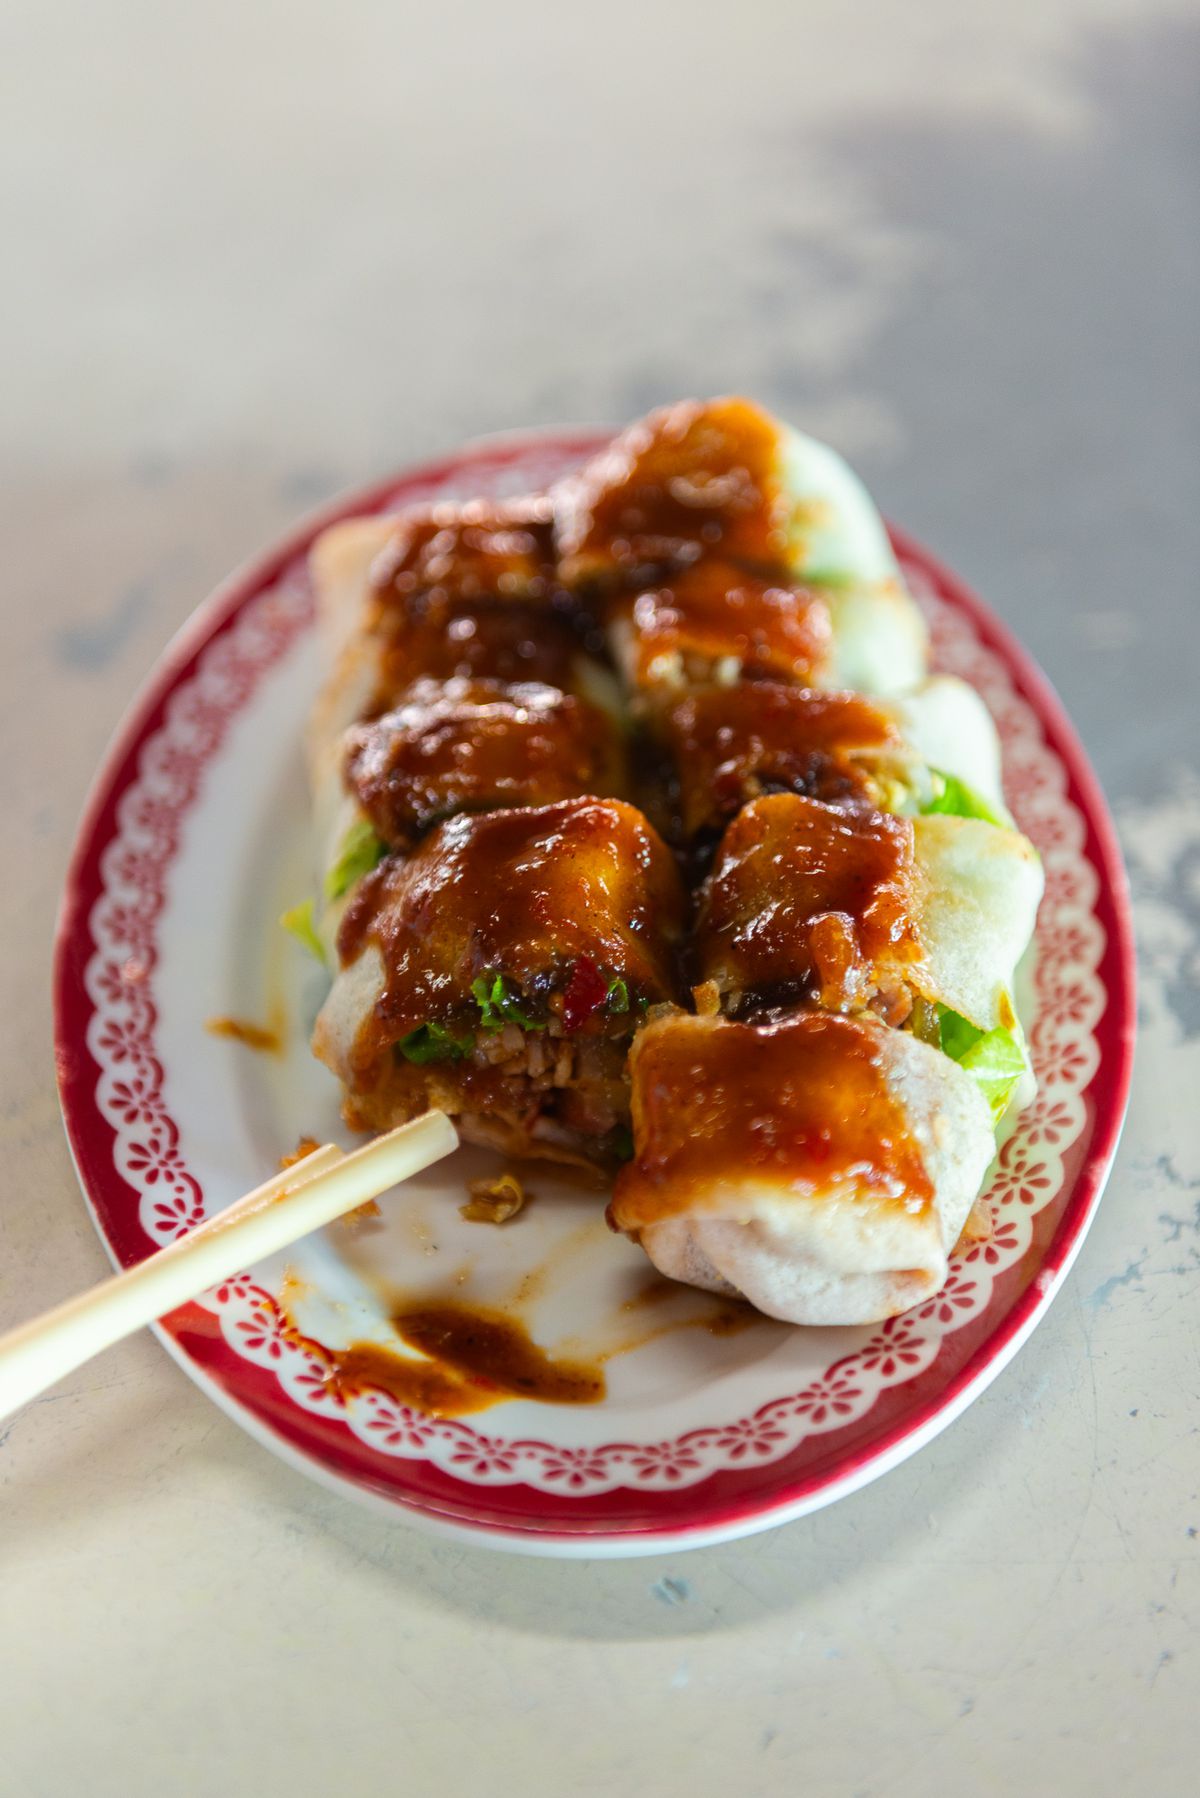 A spring roll topped with sauce and sliced, with chopsticks perched nearby.